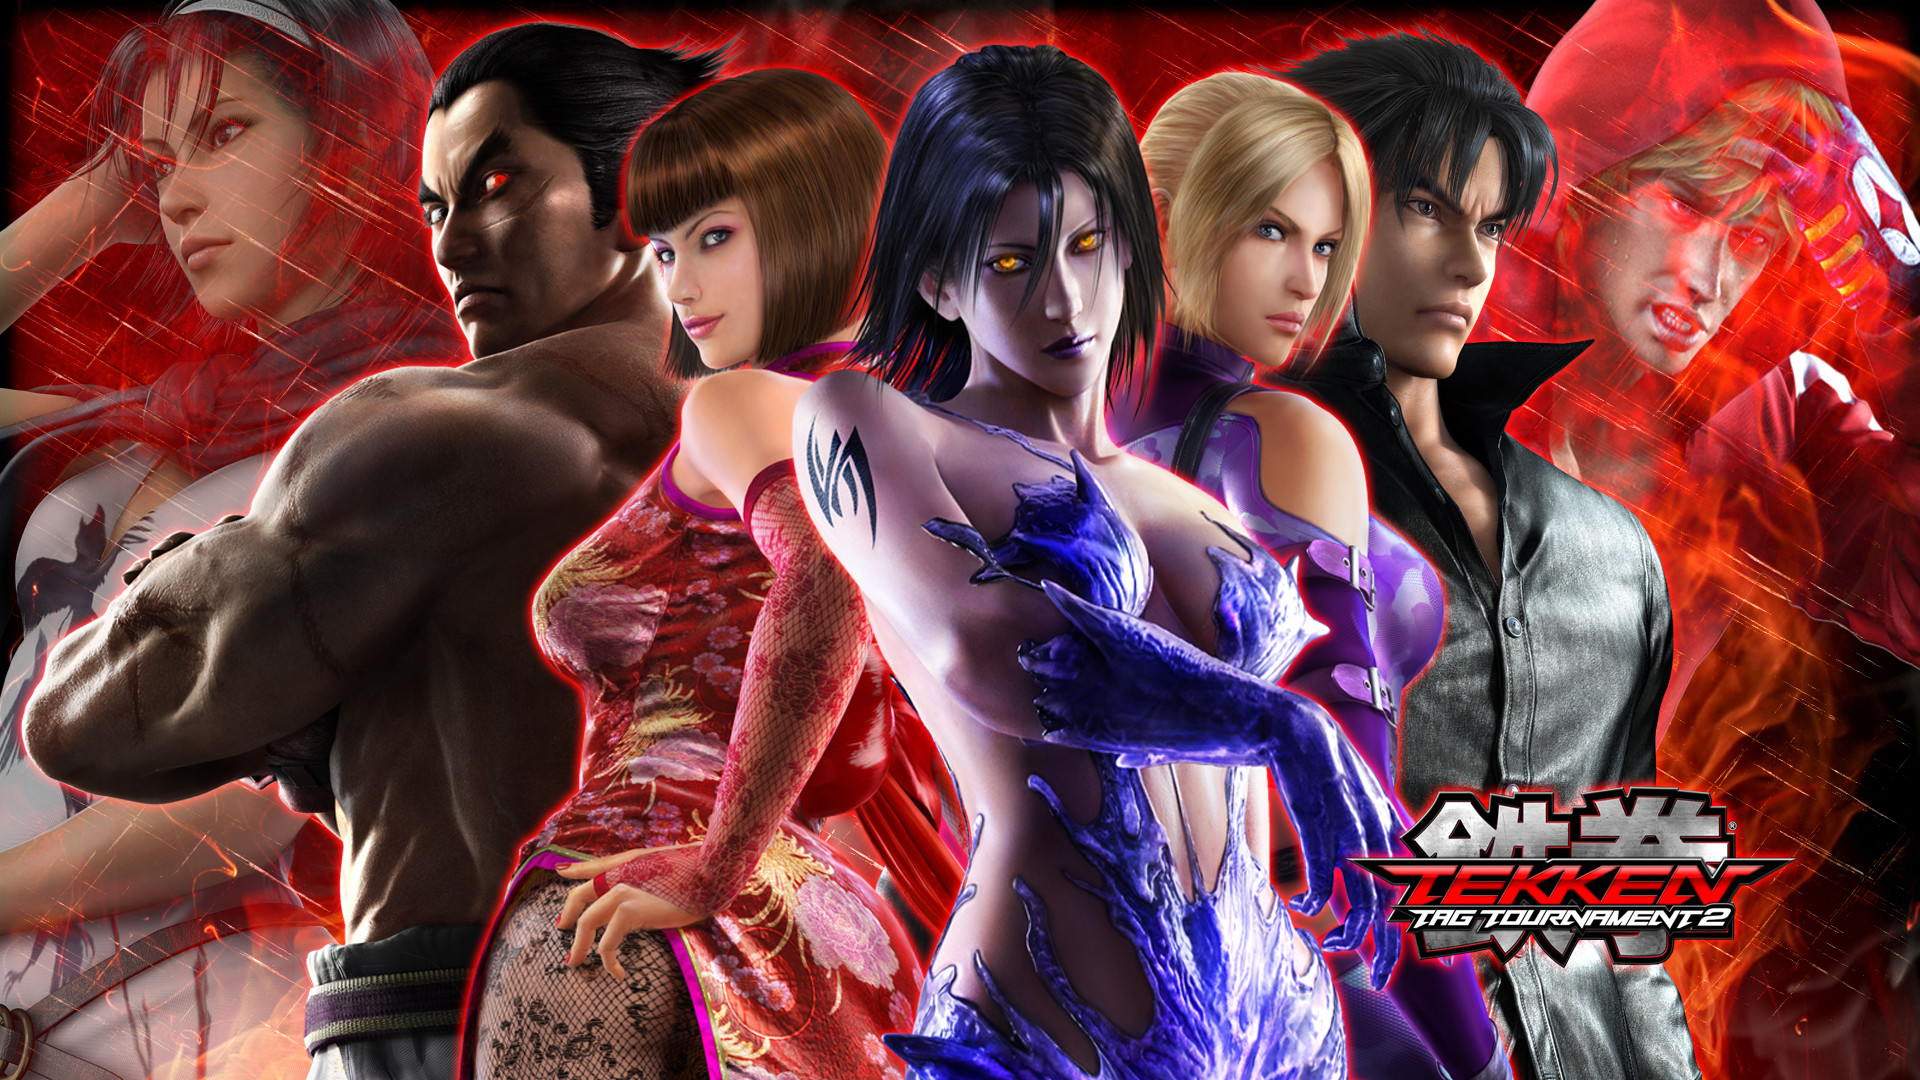 1920x1080 ... Tekken Tag Tournament 2 - New and Fresh - by jin-05